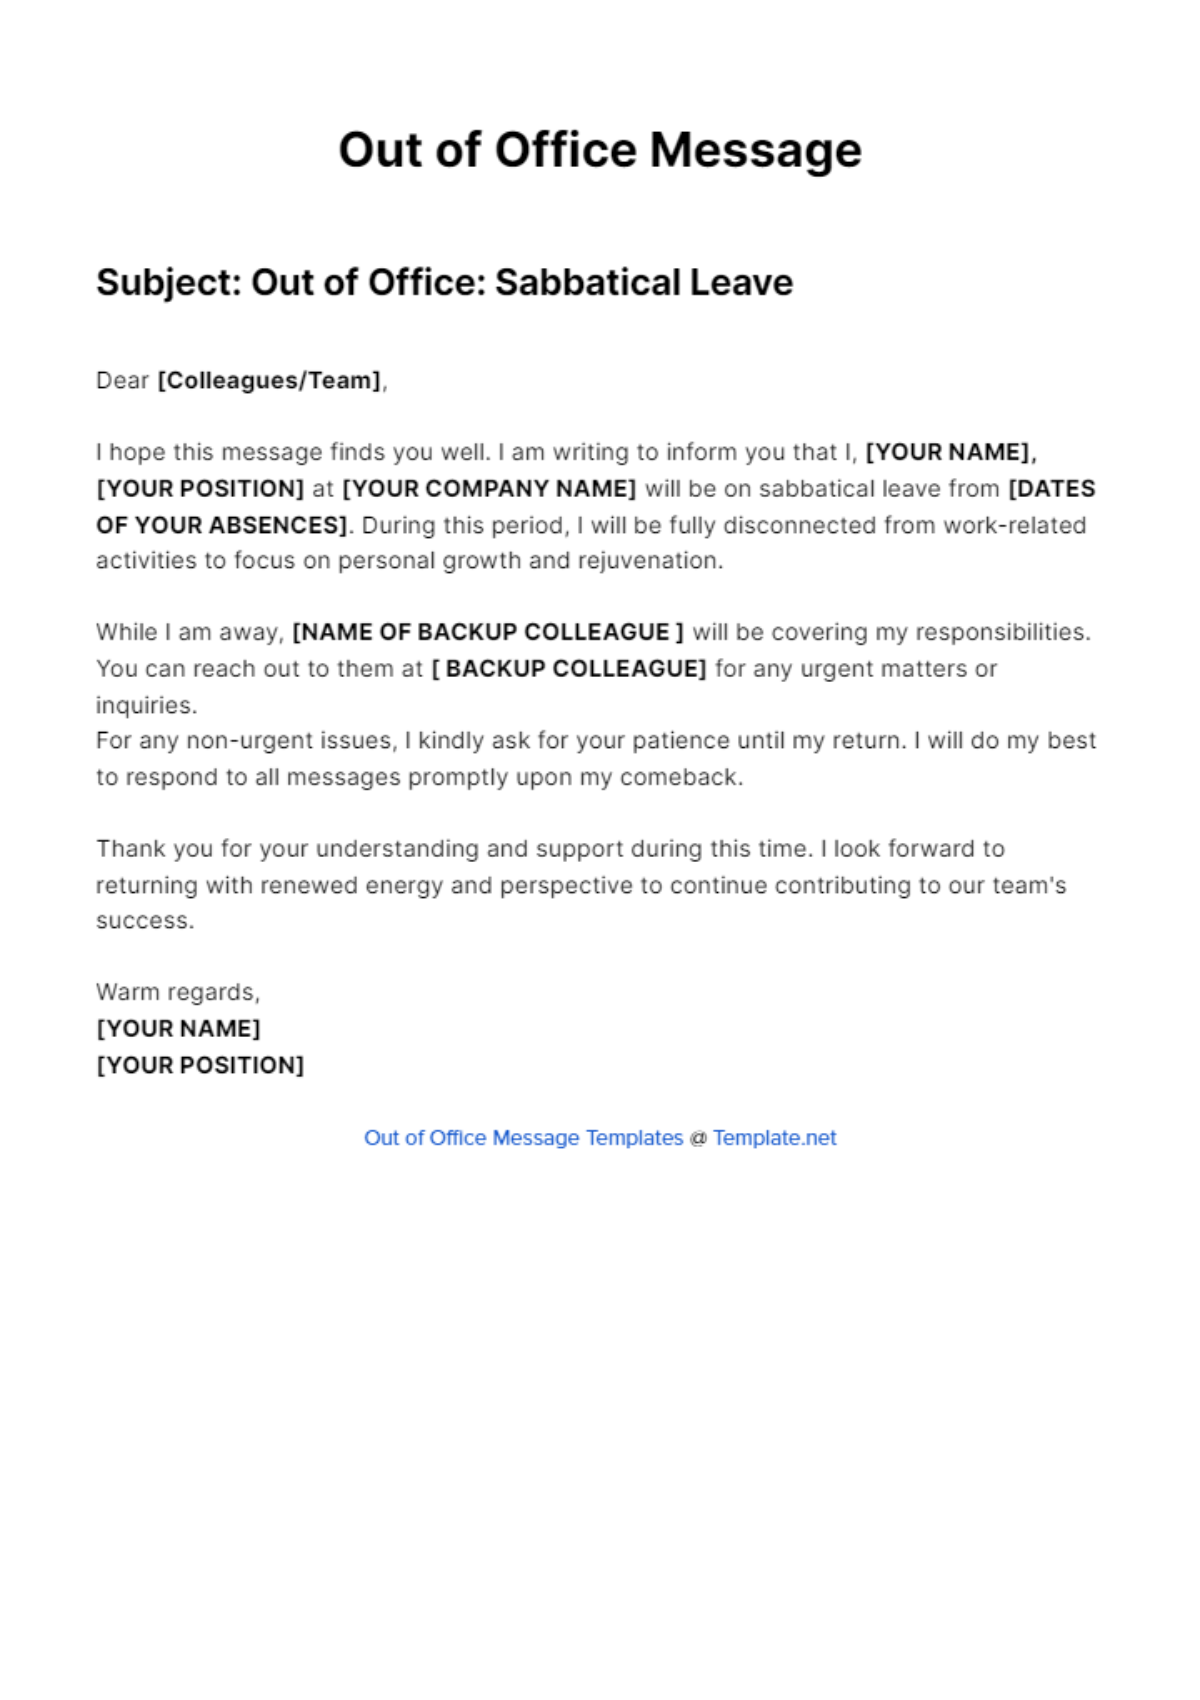 Out Of Office Message For Sabbatical Leave Template